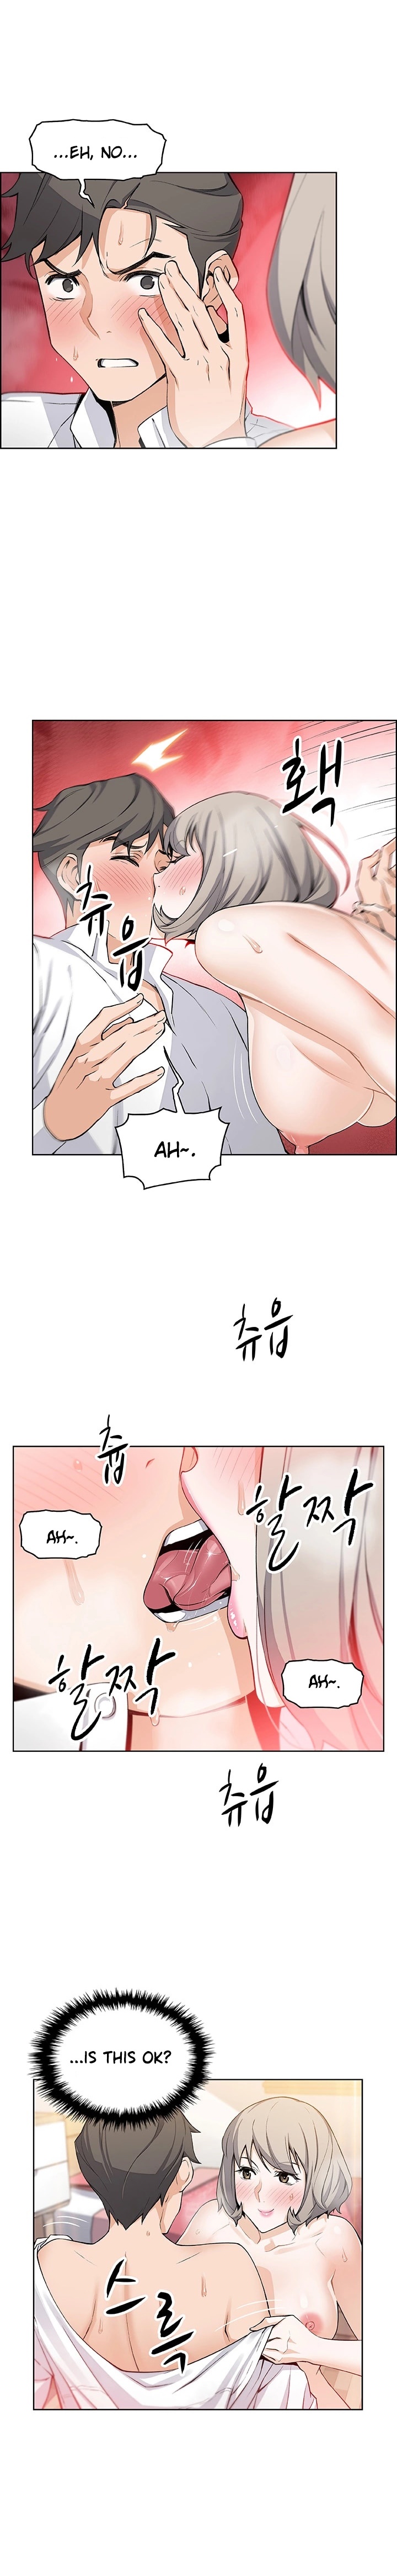 Housekeeper Manhwa - Chapter 17 Page 7